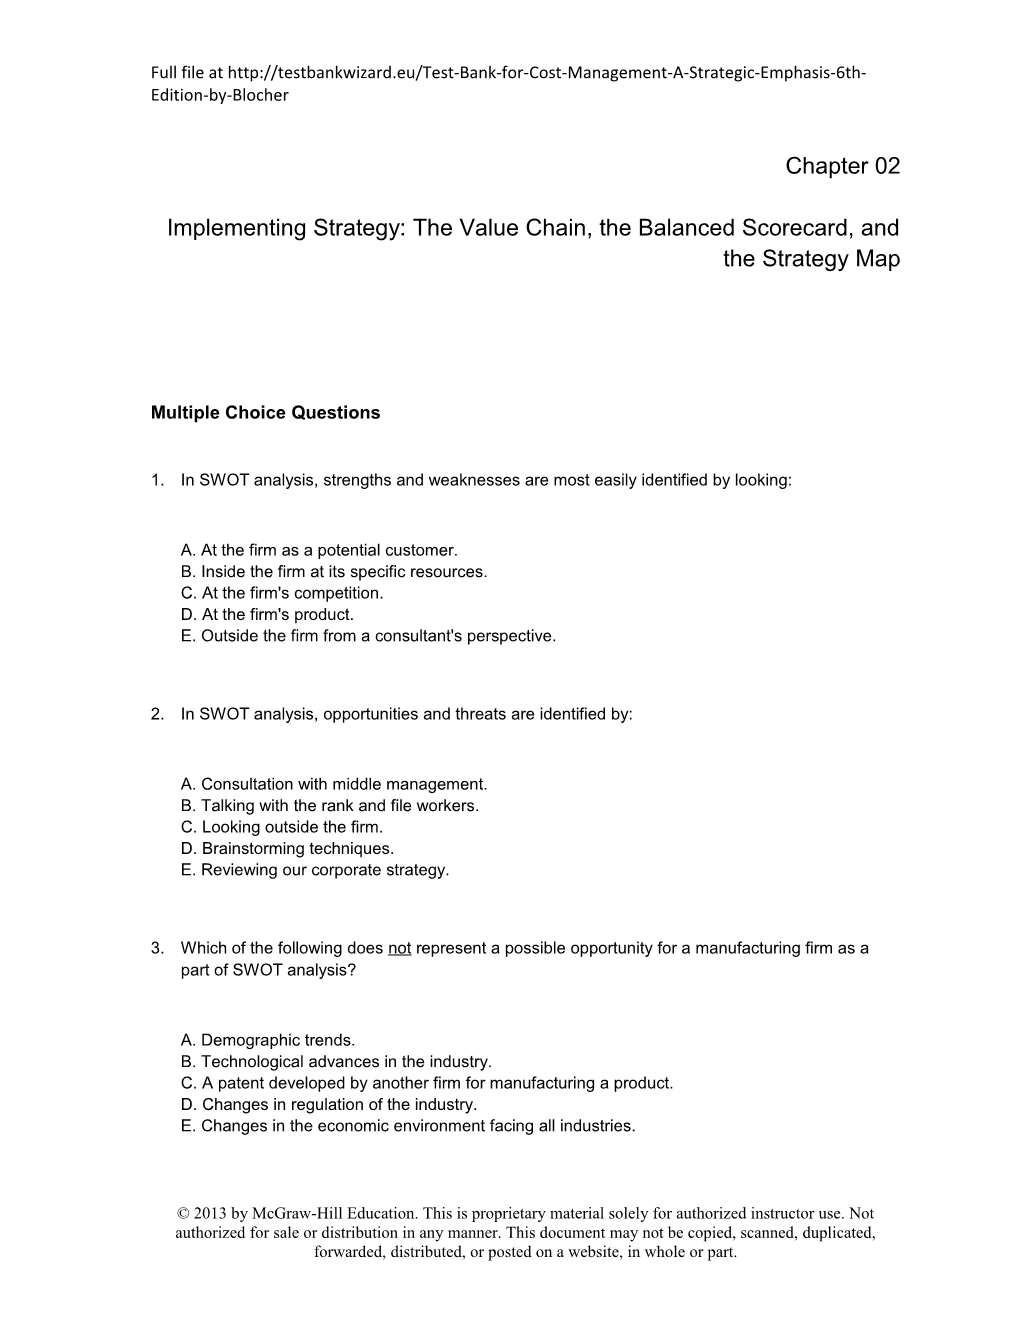 Implementing Strategy: the Value Chain, the Balanced Scorecard, and the Strategy Map